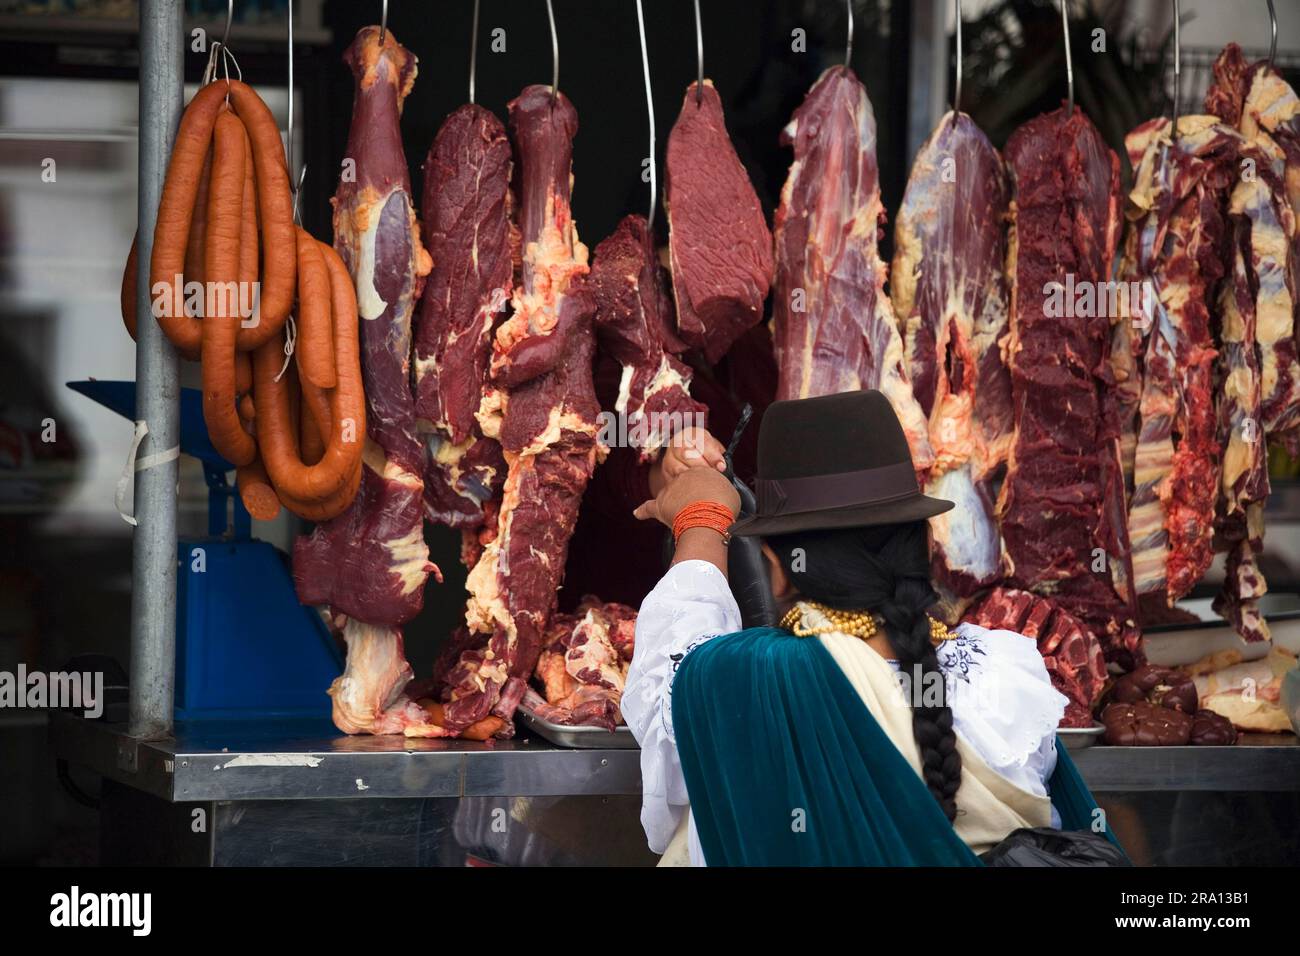 Woman buying meat, butcher's stall at market, Otavalo, Imbabura province, Ecuador, butcher, meat stall Stock Photo